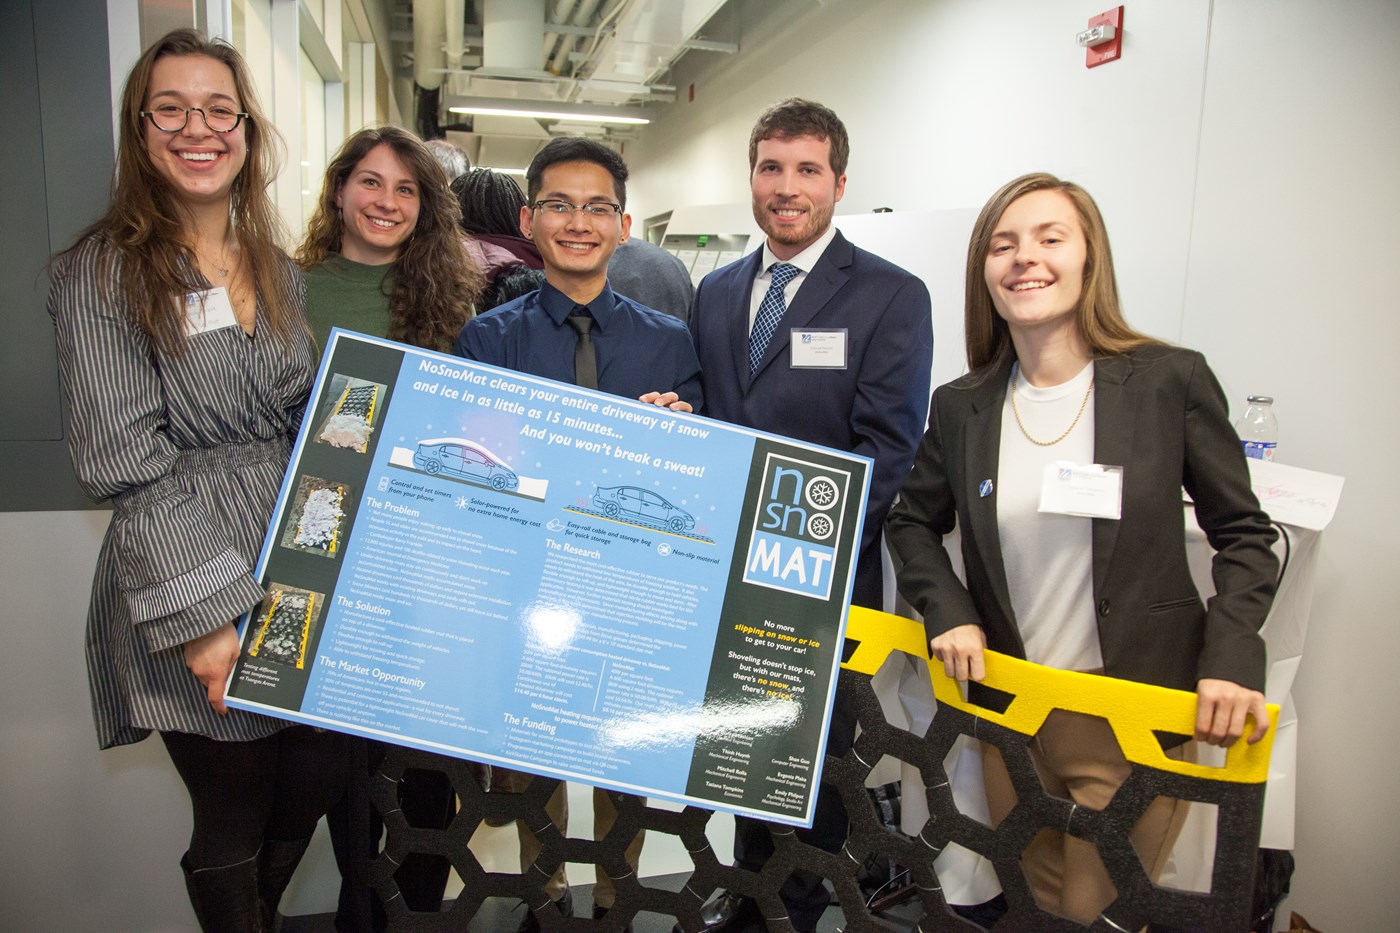 NoSnoMat Team at the 2019 Engineering Prototyping Competition